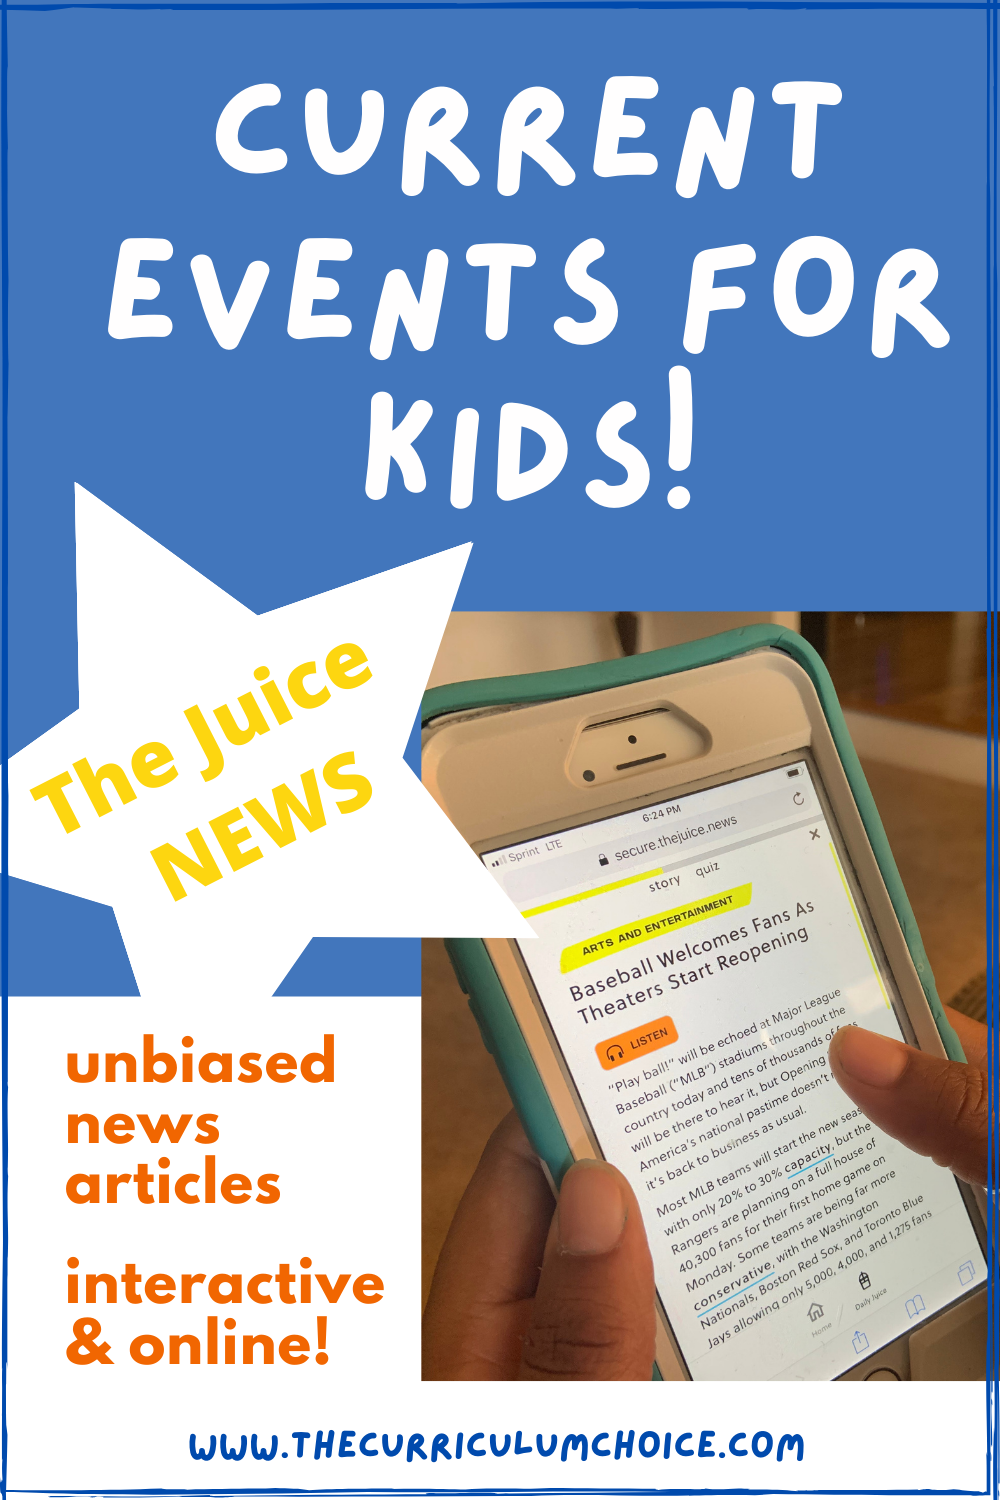 Current Events News For Kids - Kiah Sallee